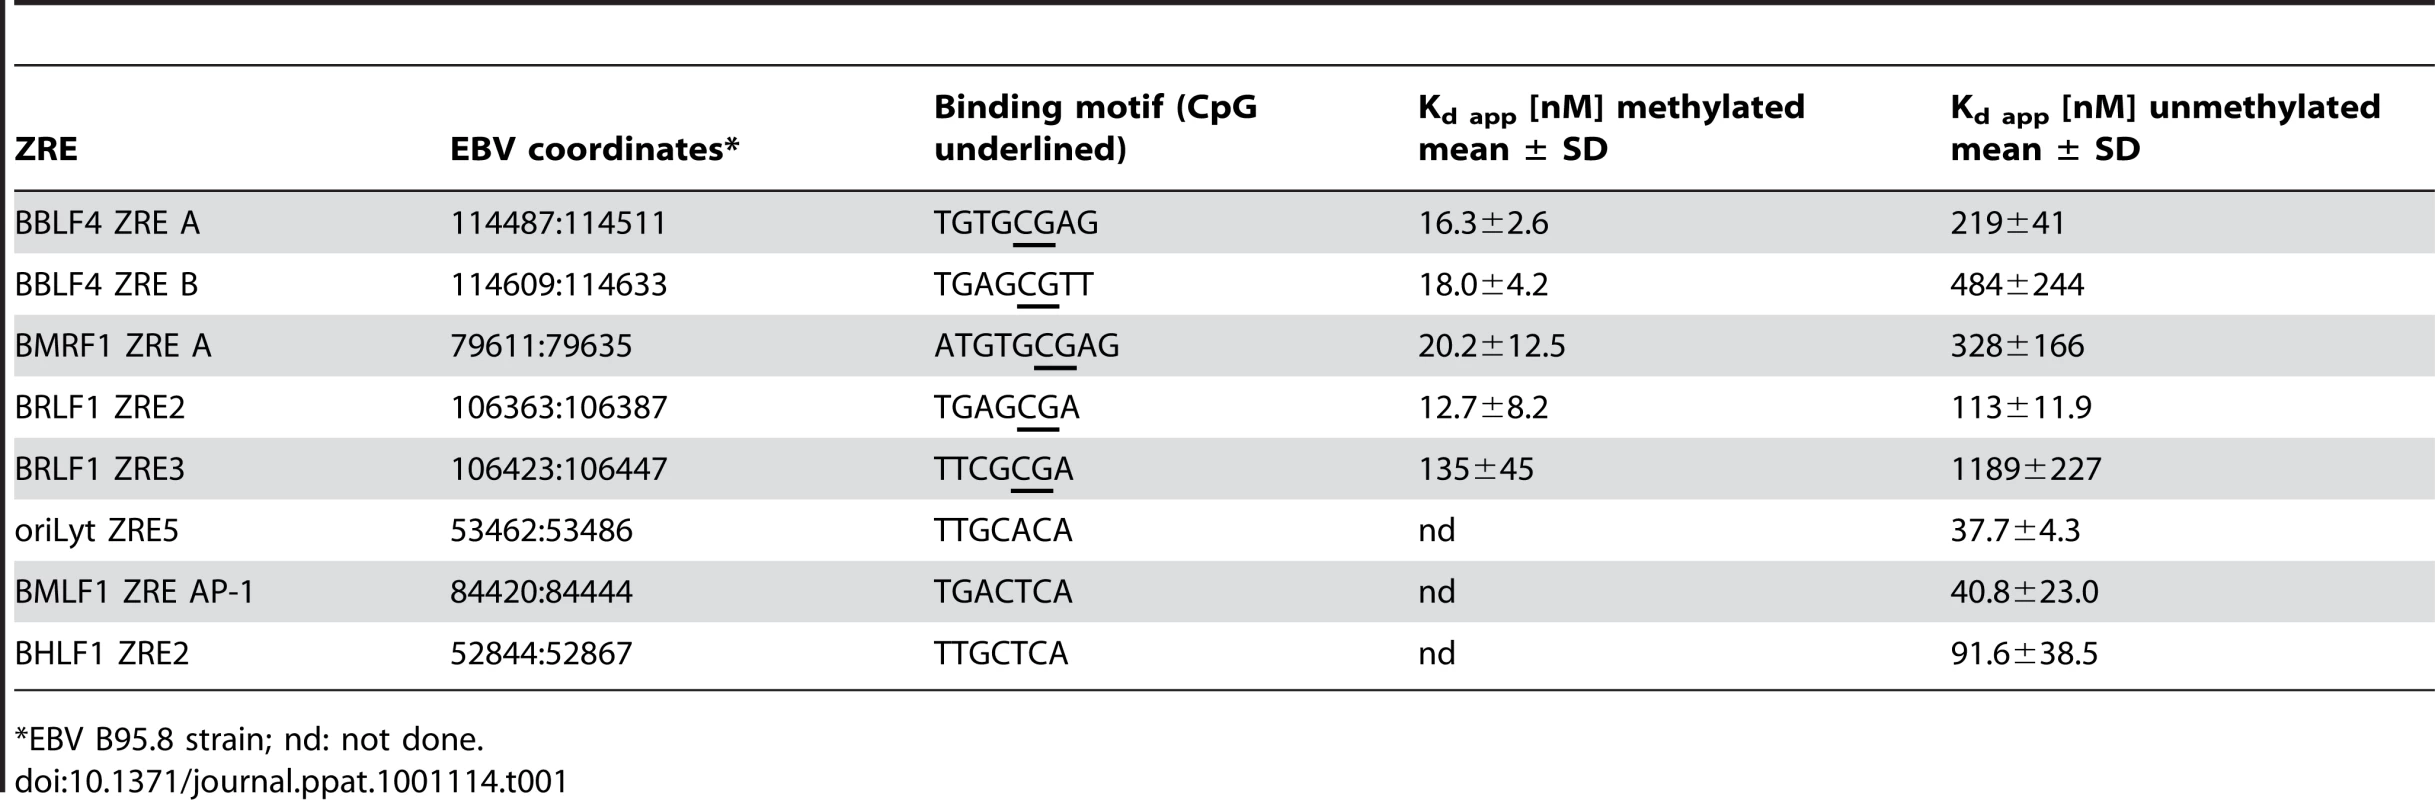 Binding affinities of Zta to selected unmethylated and CpG-methylated ZREs.